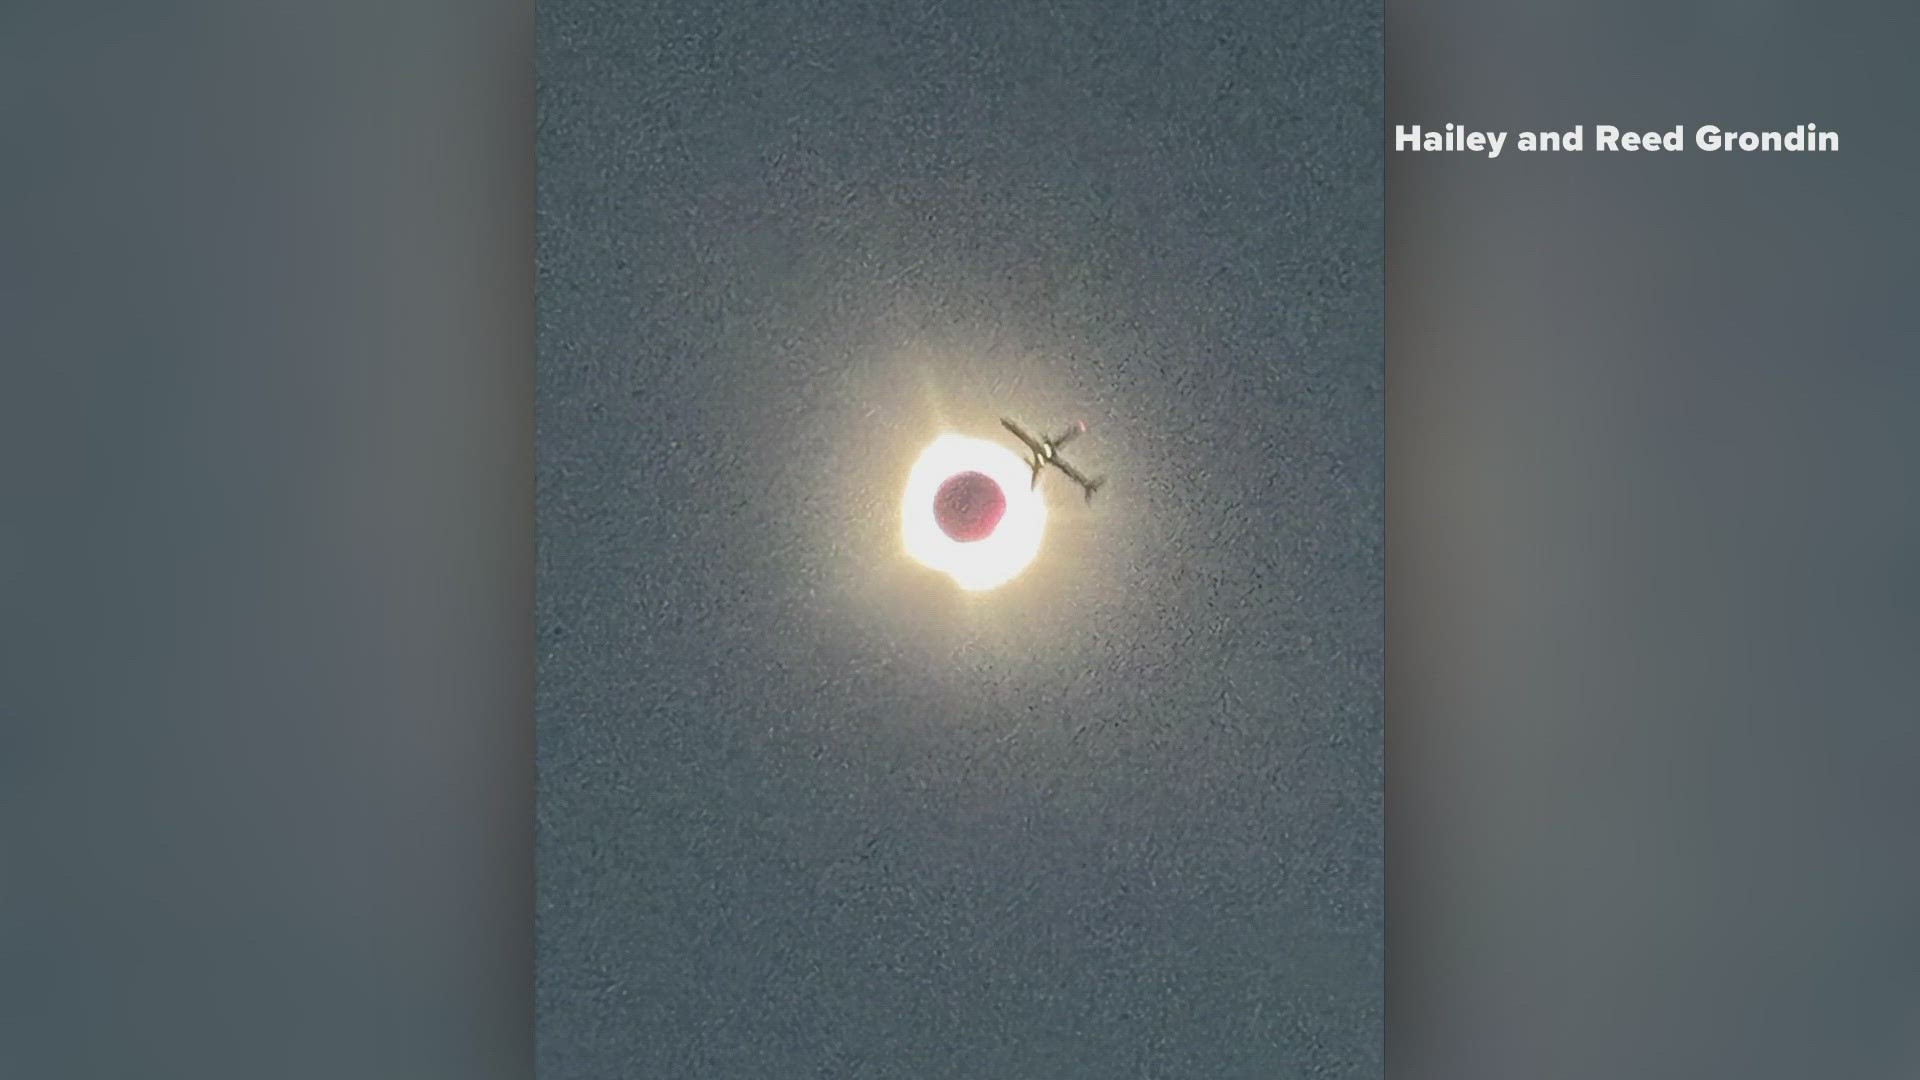 Residents from around DFW sent in their view of the eclipse on Monday afternoon.